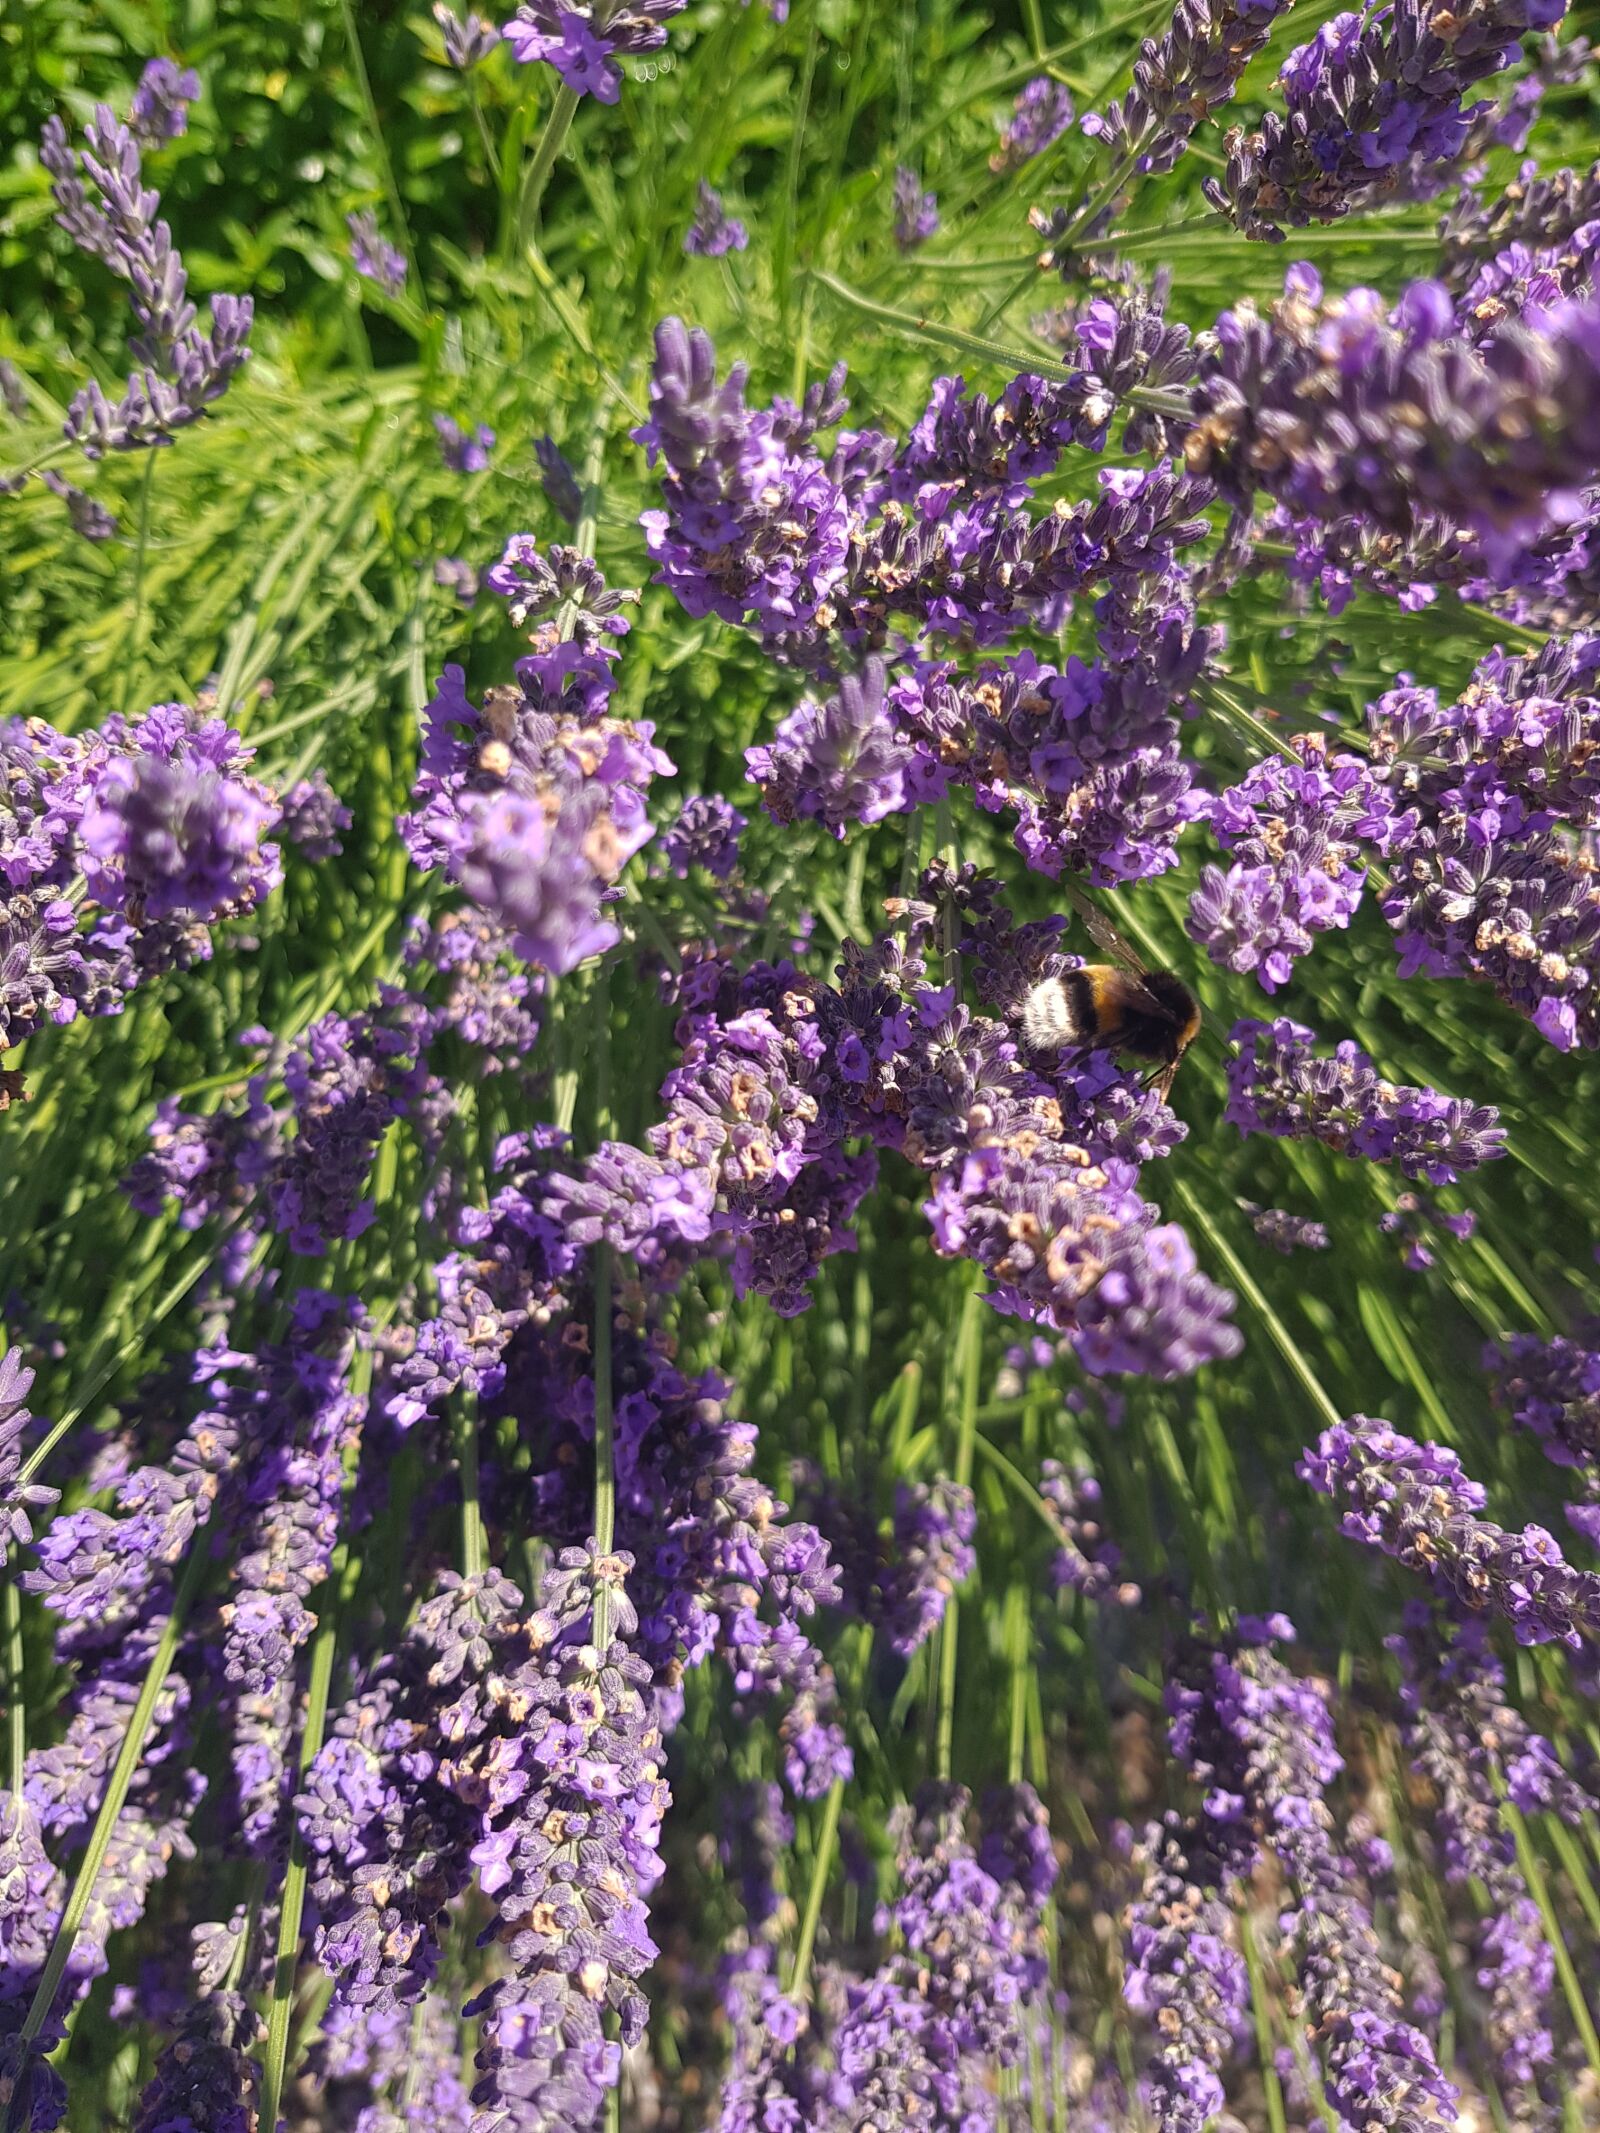 Samsung Galaxy S8 sample photo. Lavender, hummel, insect photography